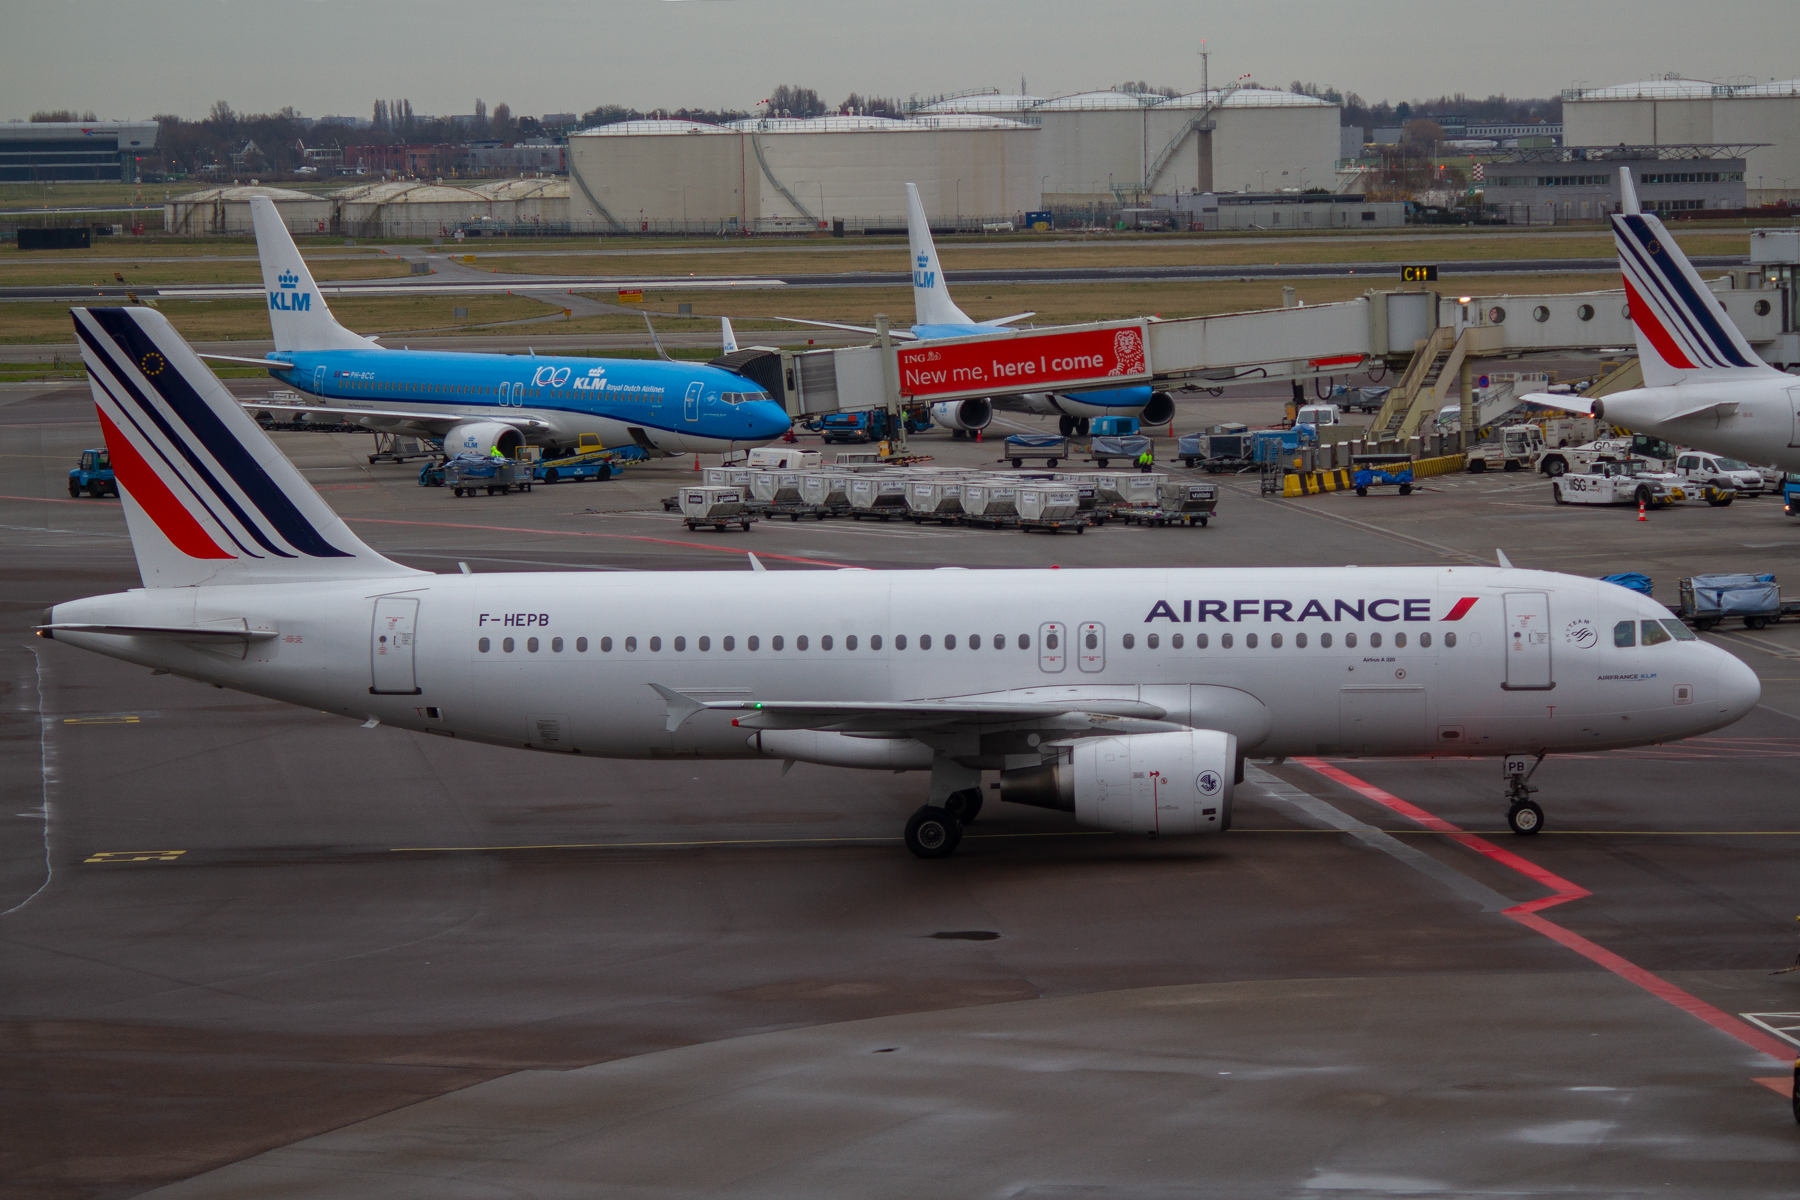 Air France Airbus A320-200 F-HEPB at Schiphol